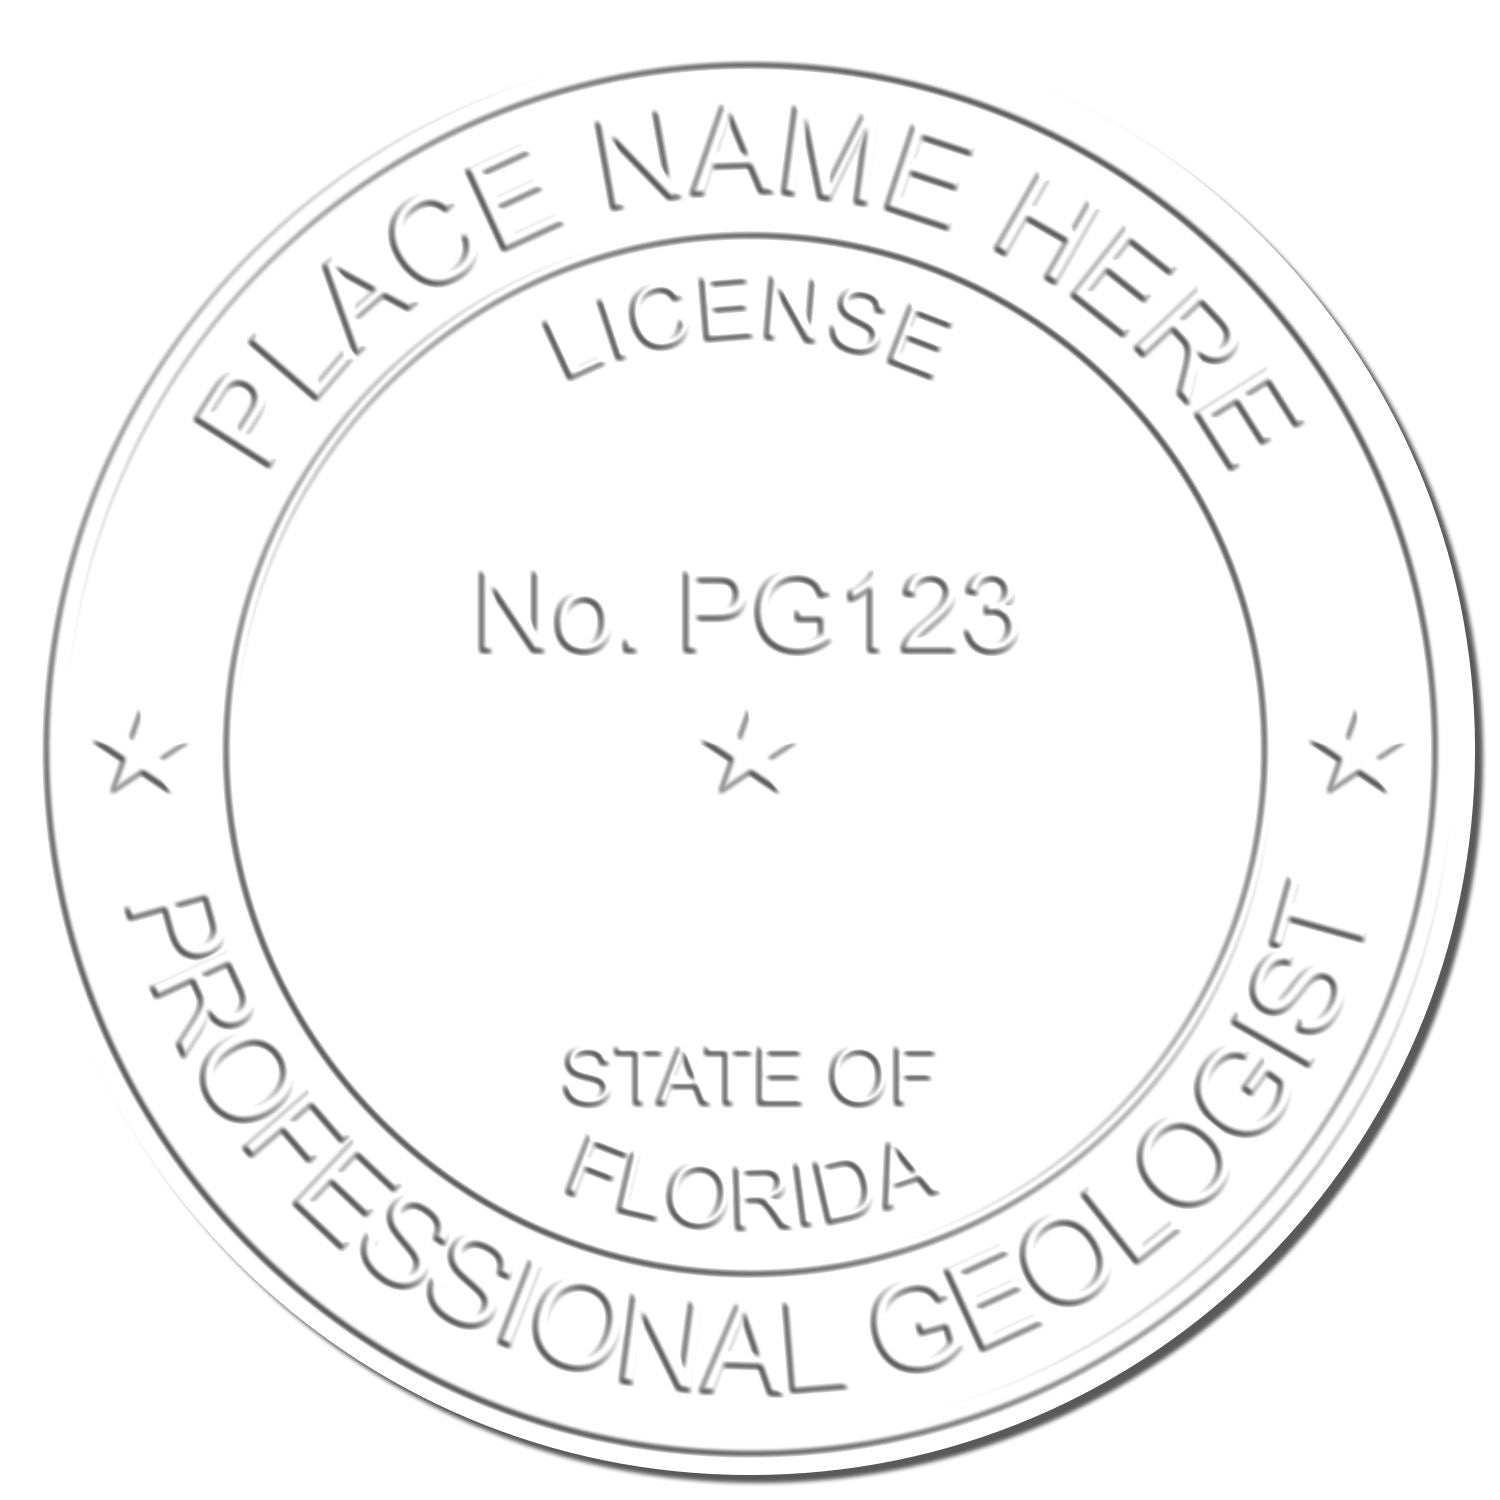 The main image for the Florida Geologist Desk Seal depicting a sample of the imprint and imprint sample